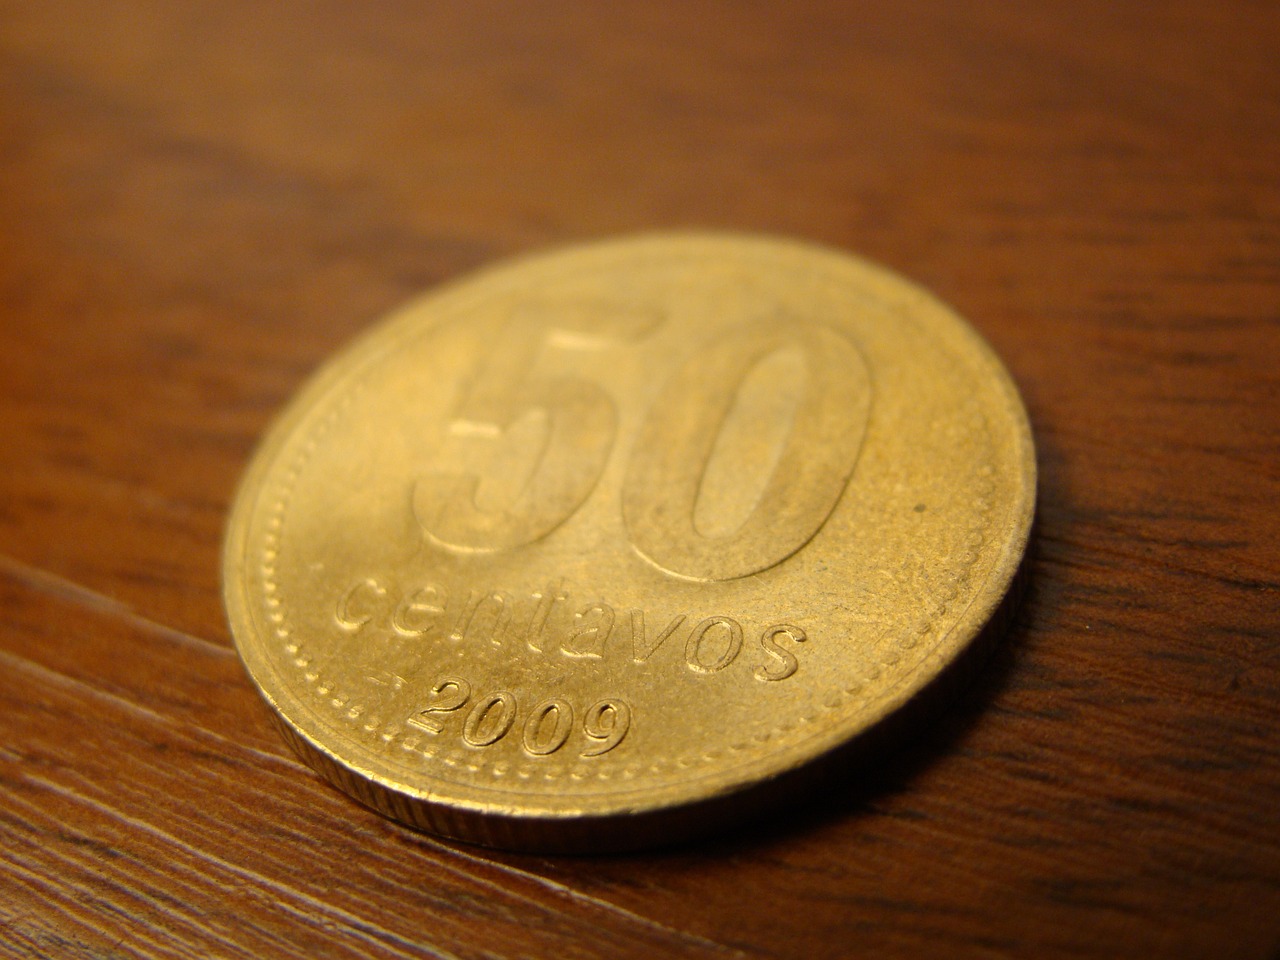 cents currency price free photo